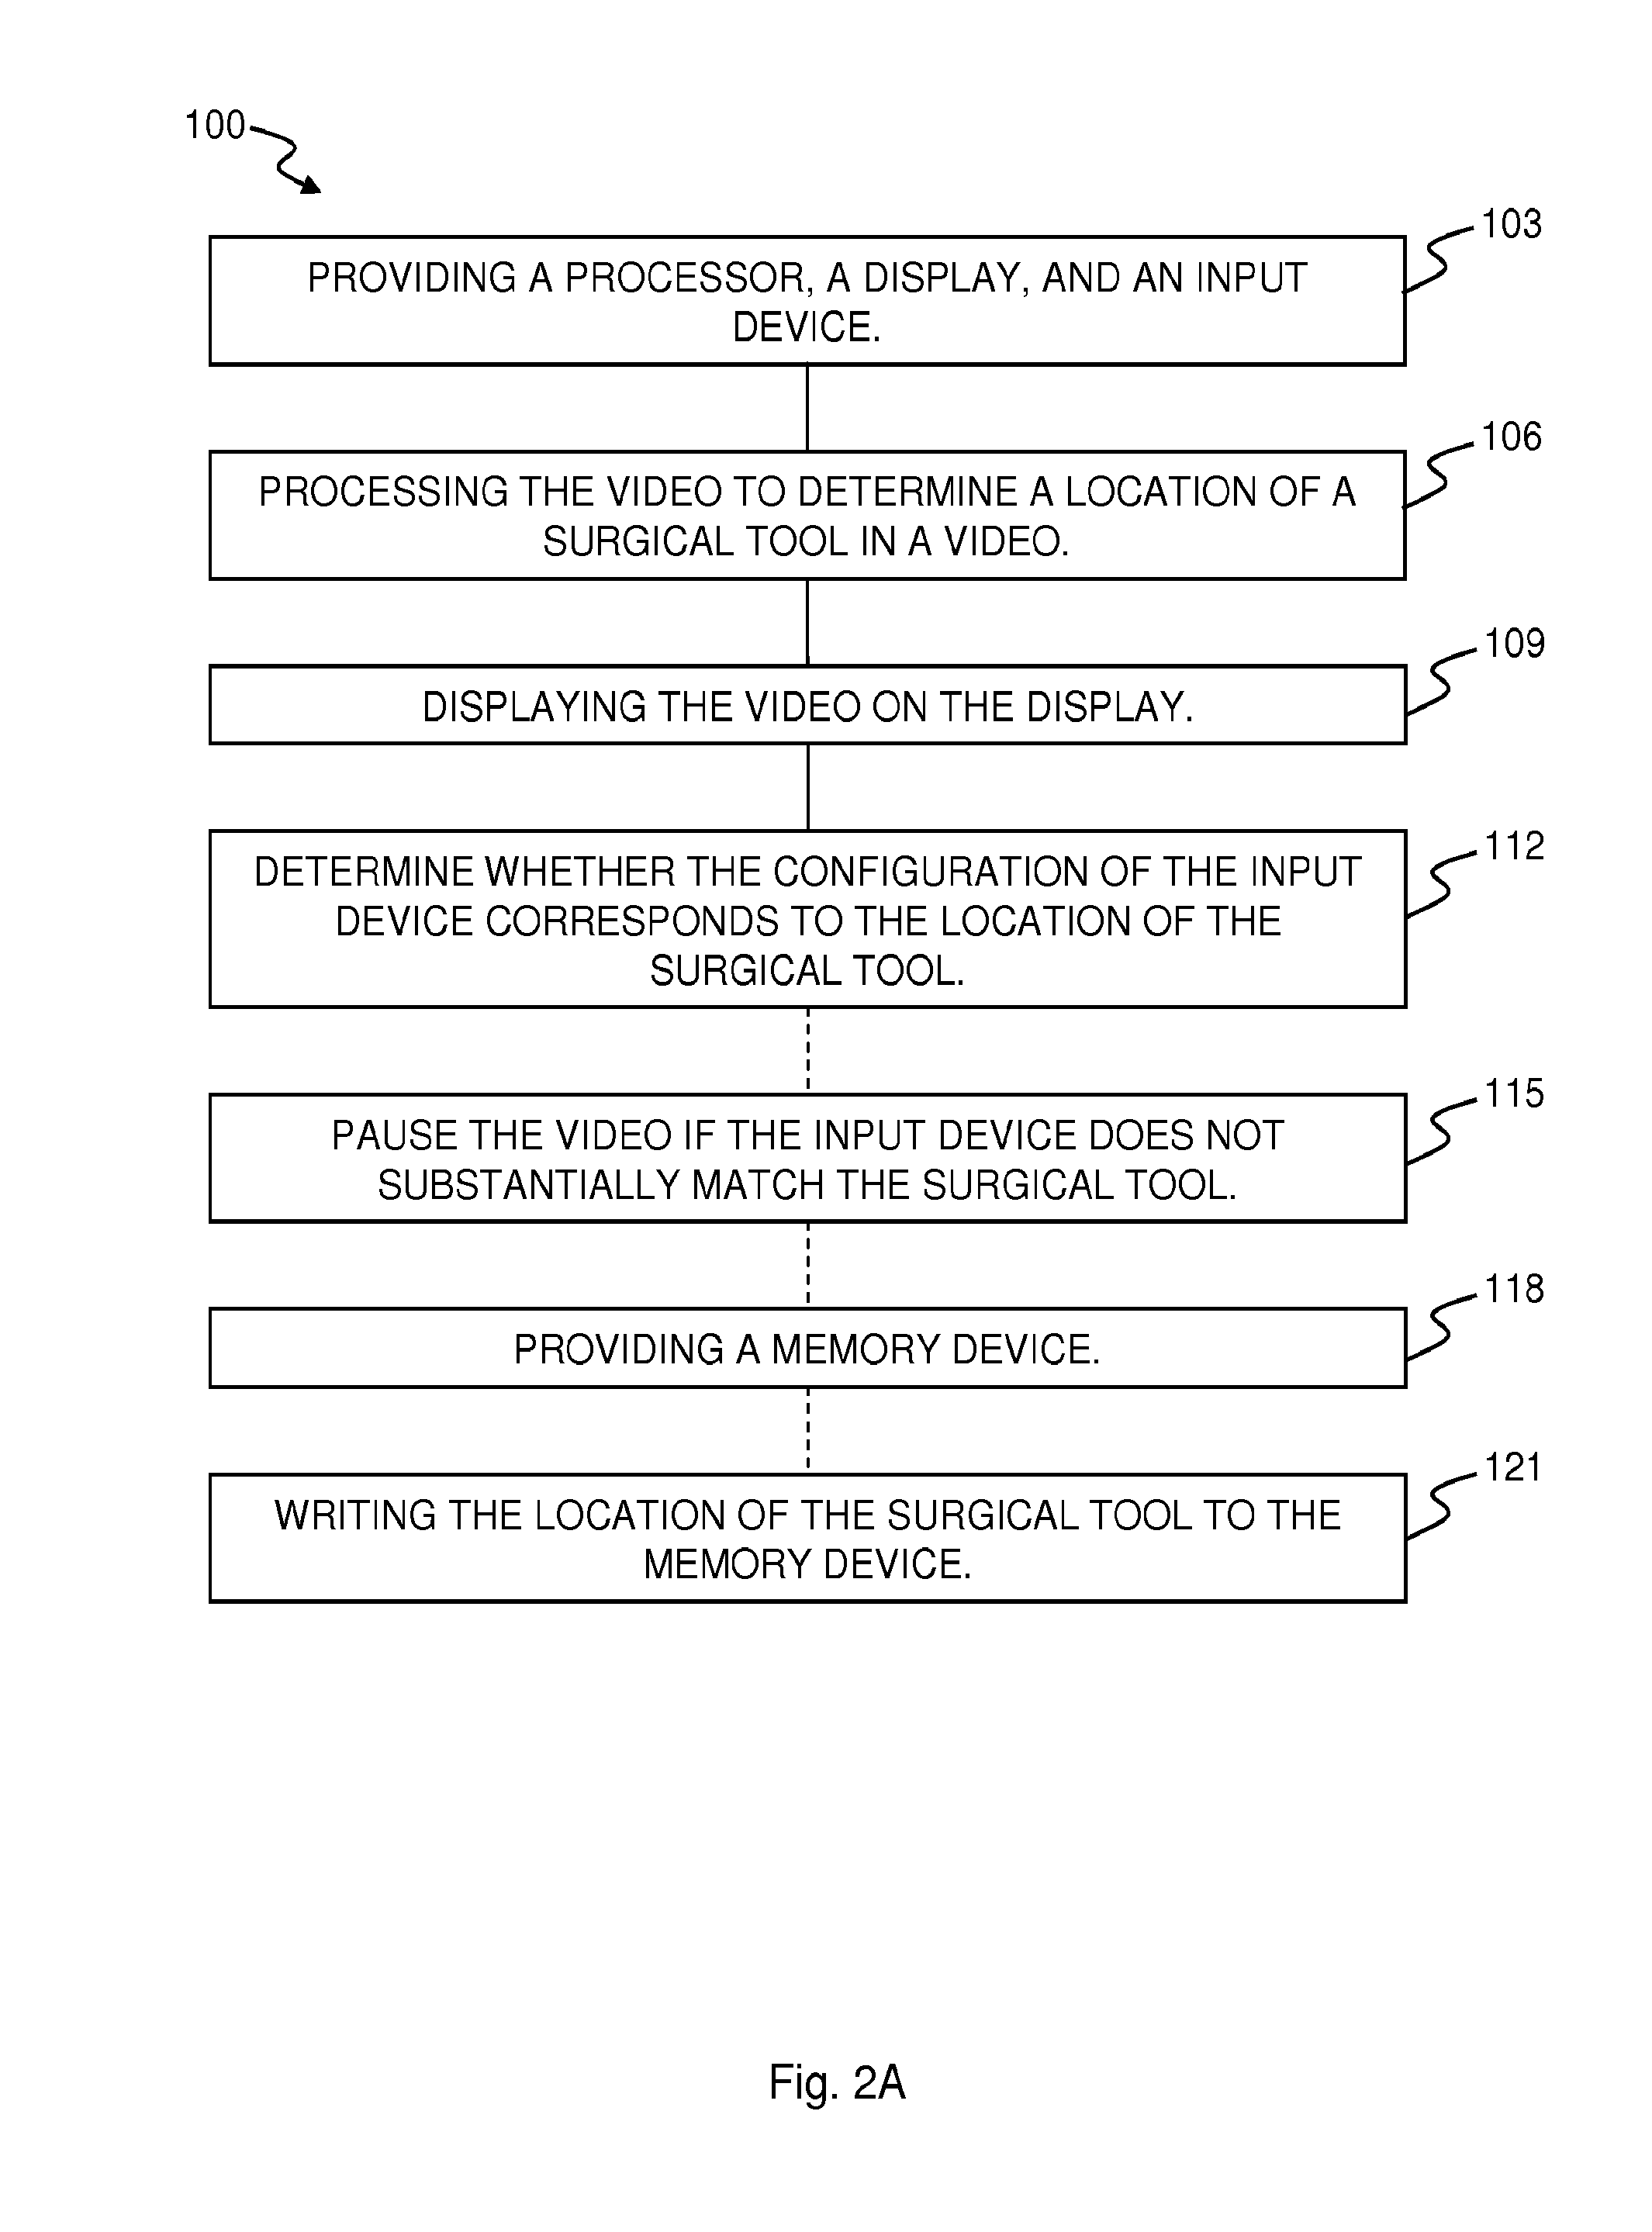 Method and System for Automatic Tool Position Determination for Minimally-Invasive Surgery Training